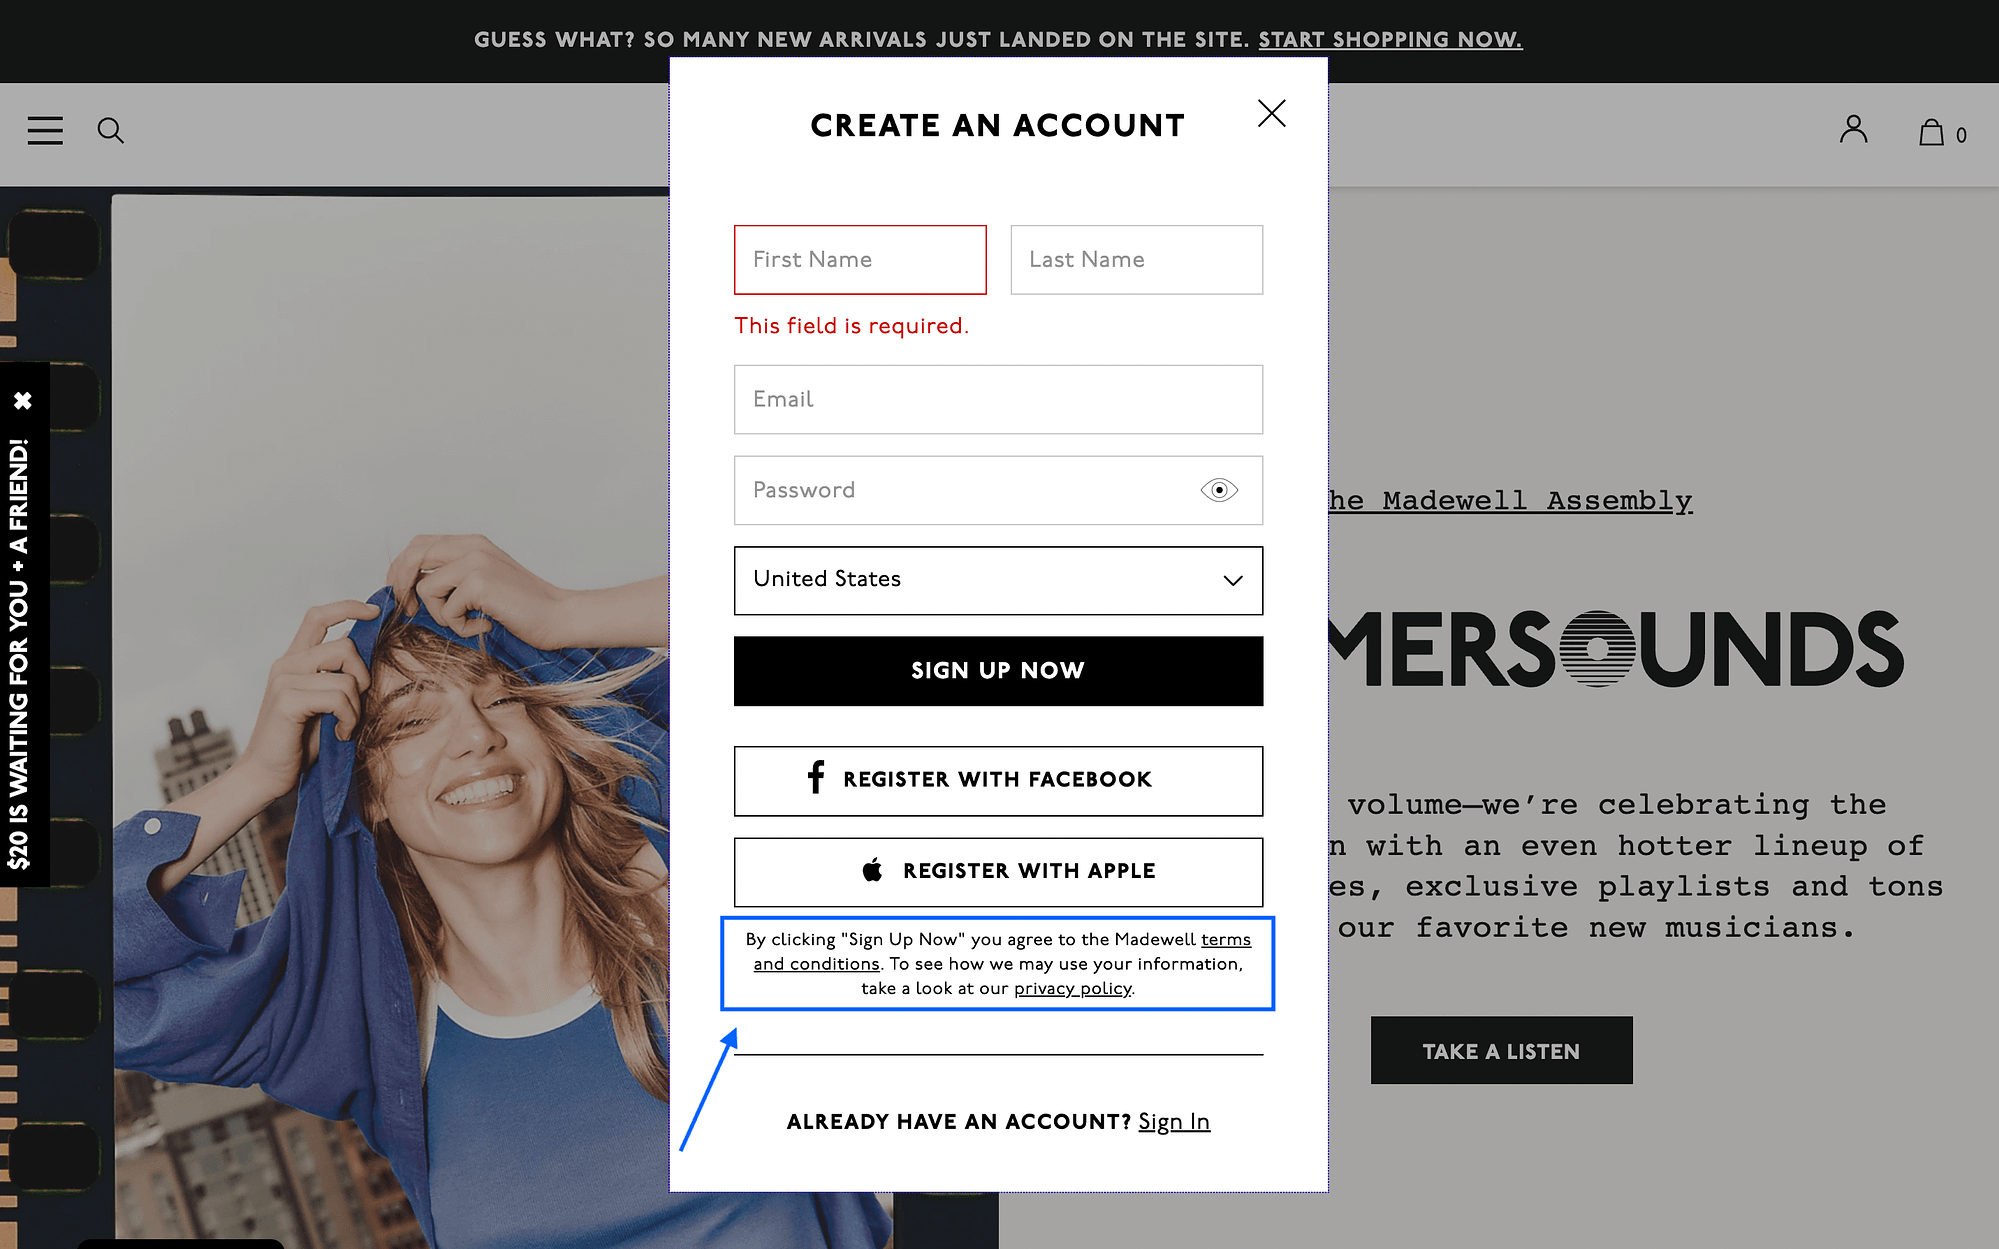 Terms and Conditions / Privacy policy links in an ecommerce sign up form.